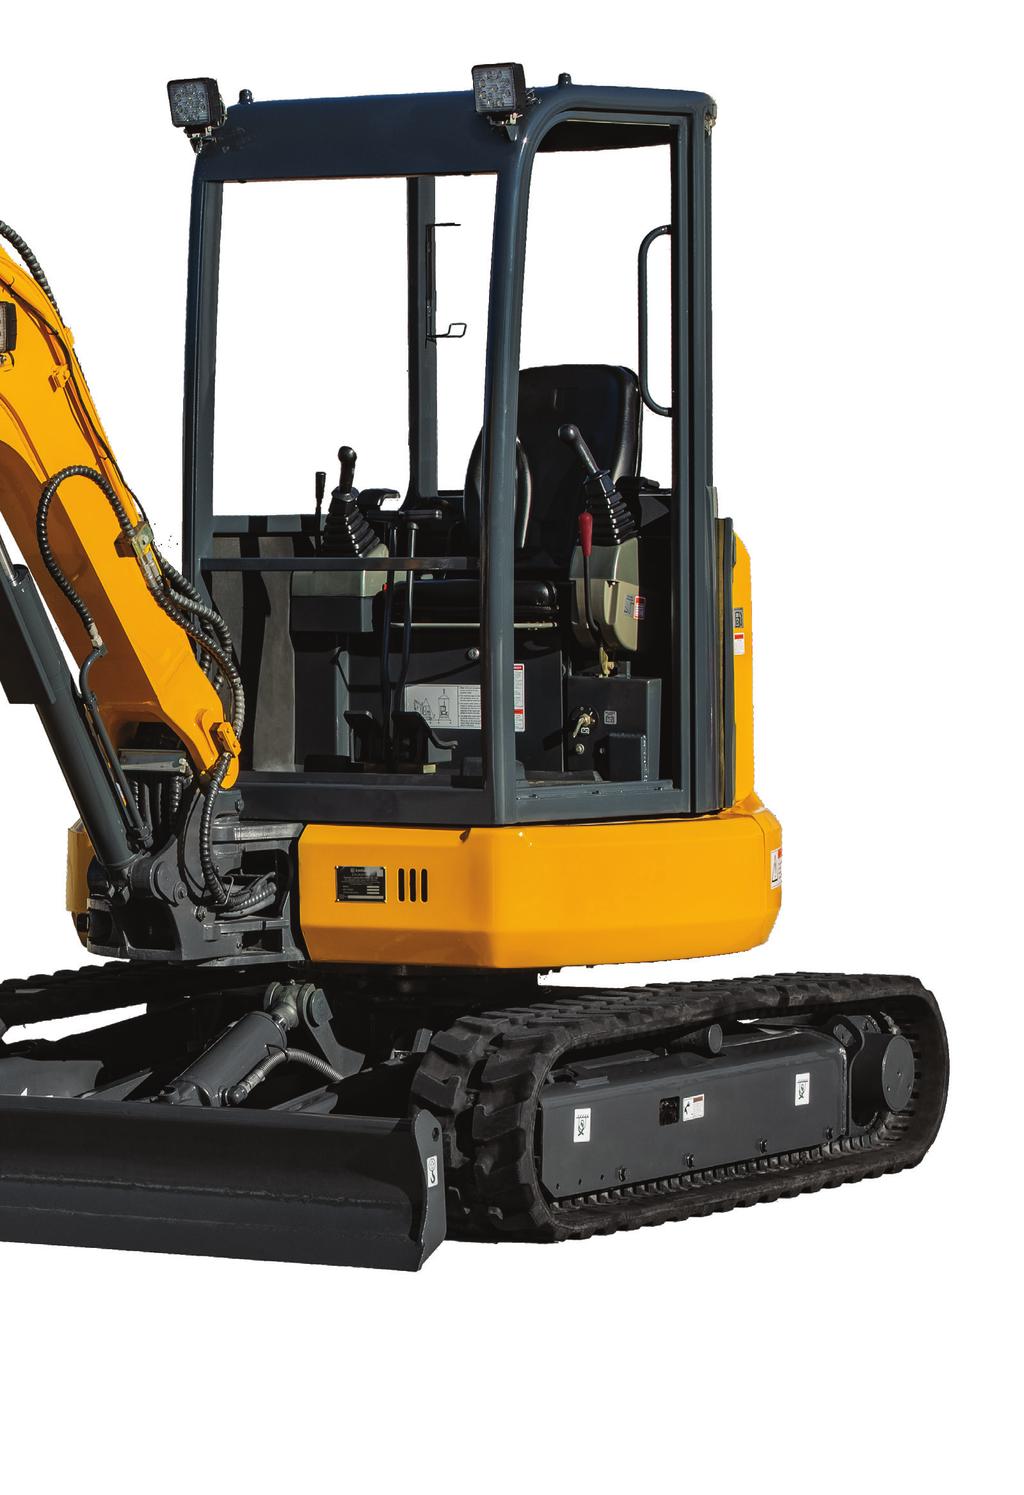 ZERO TAIL SWING The 9035EZTS, zero tail swing, increases operator visibility and productivity when working in confined spaces where the upper body stays entirely within the width of the undercarriage.